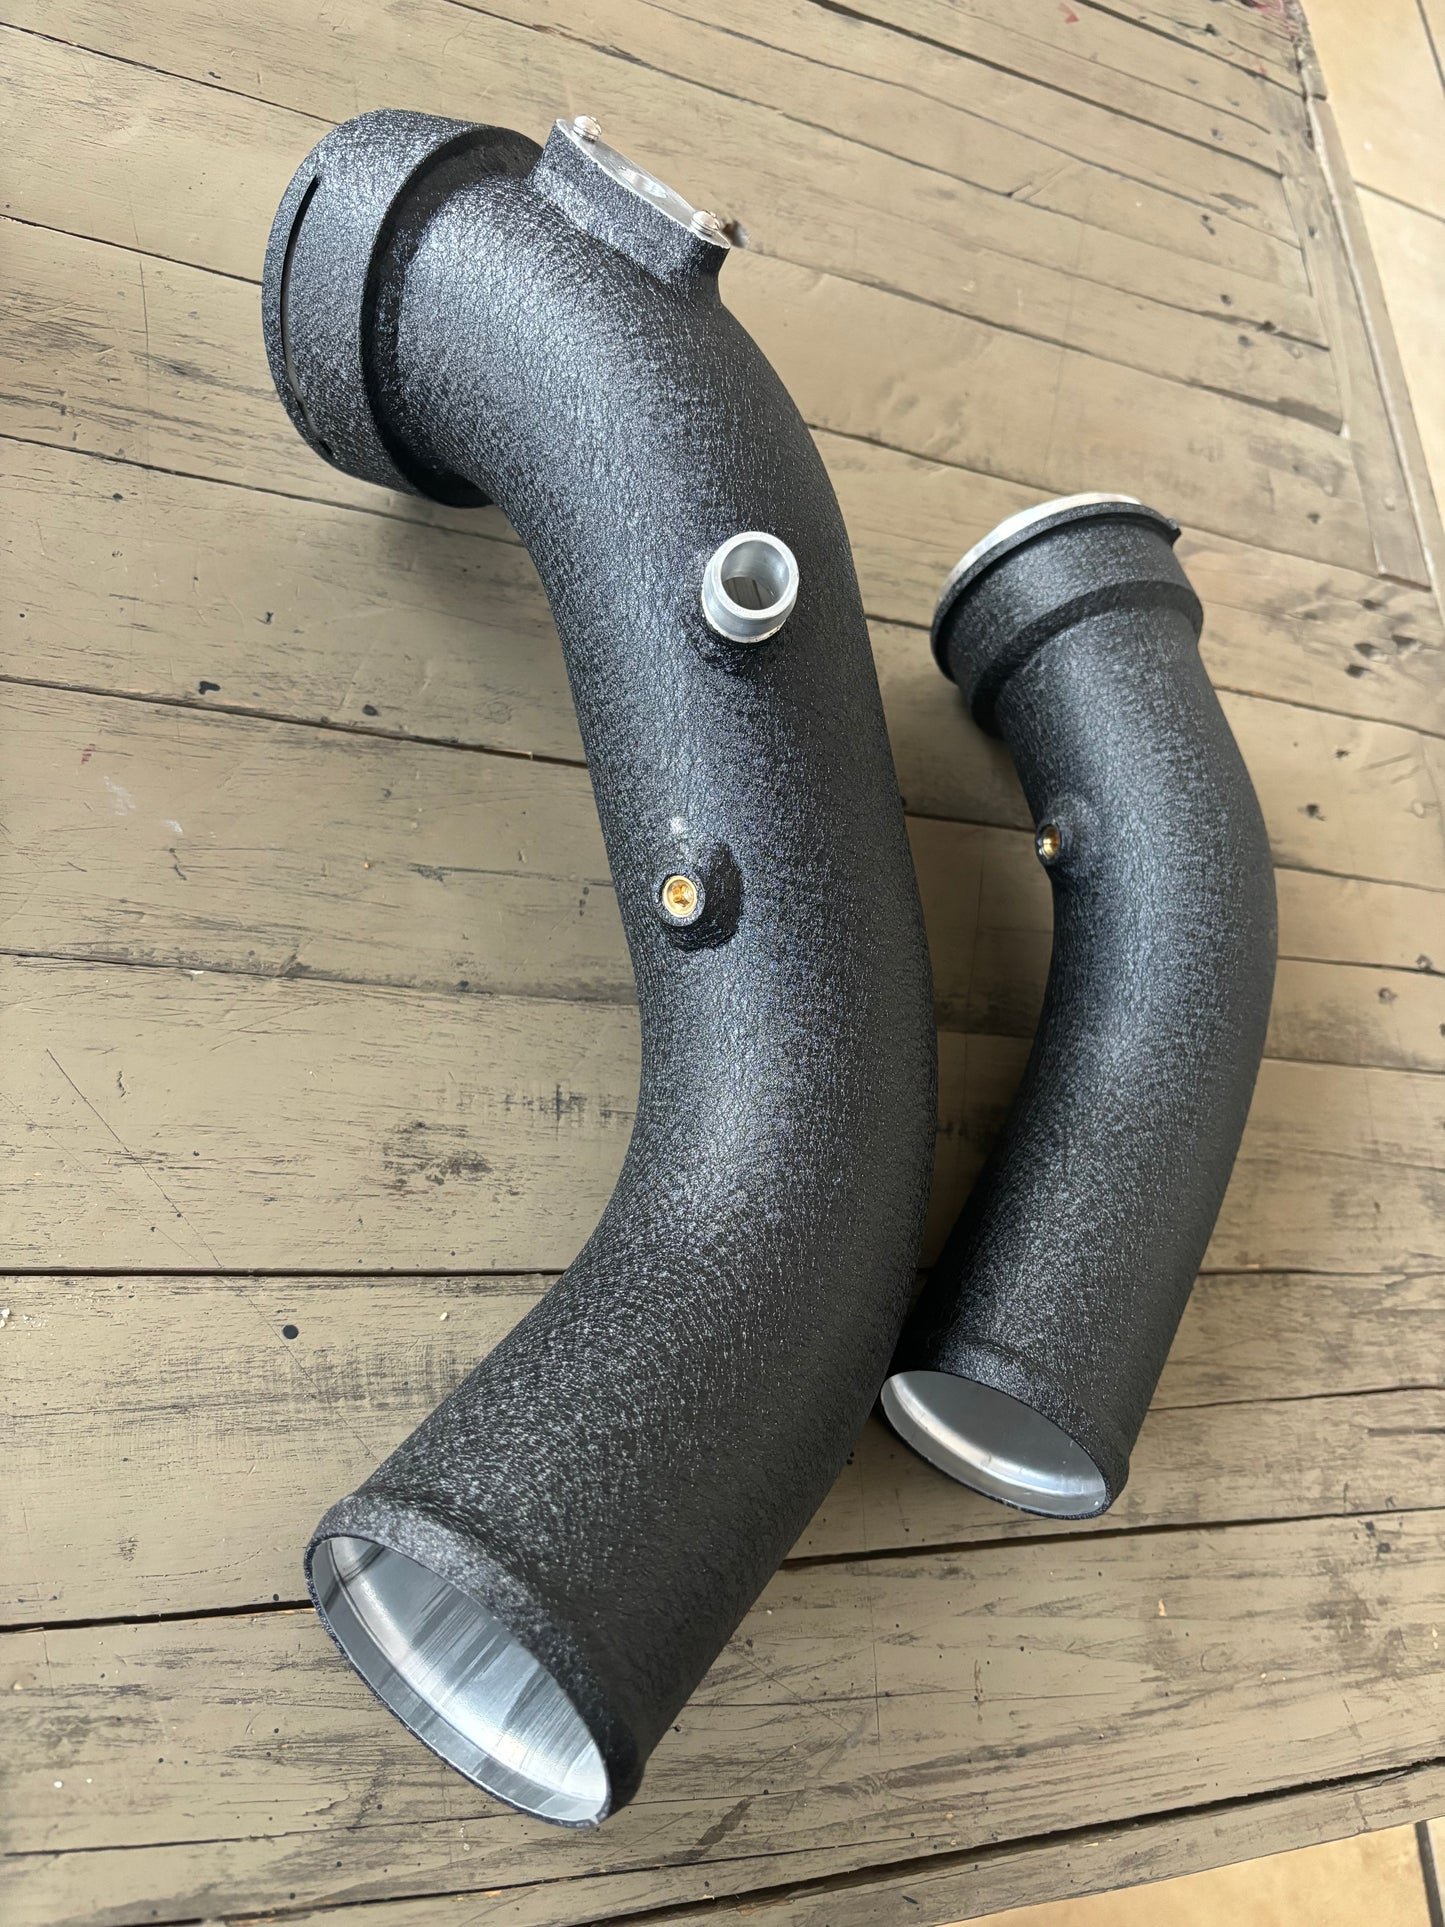 BMW n55 charge pipes